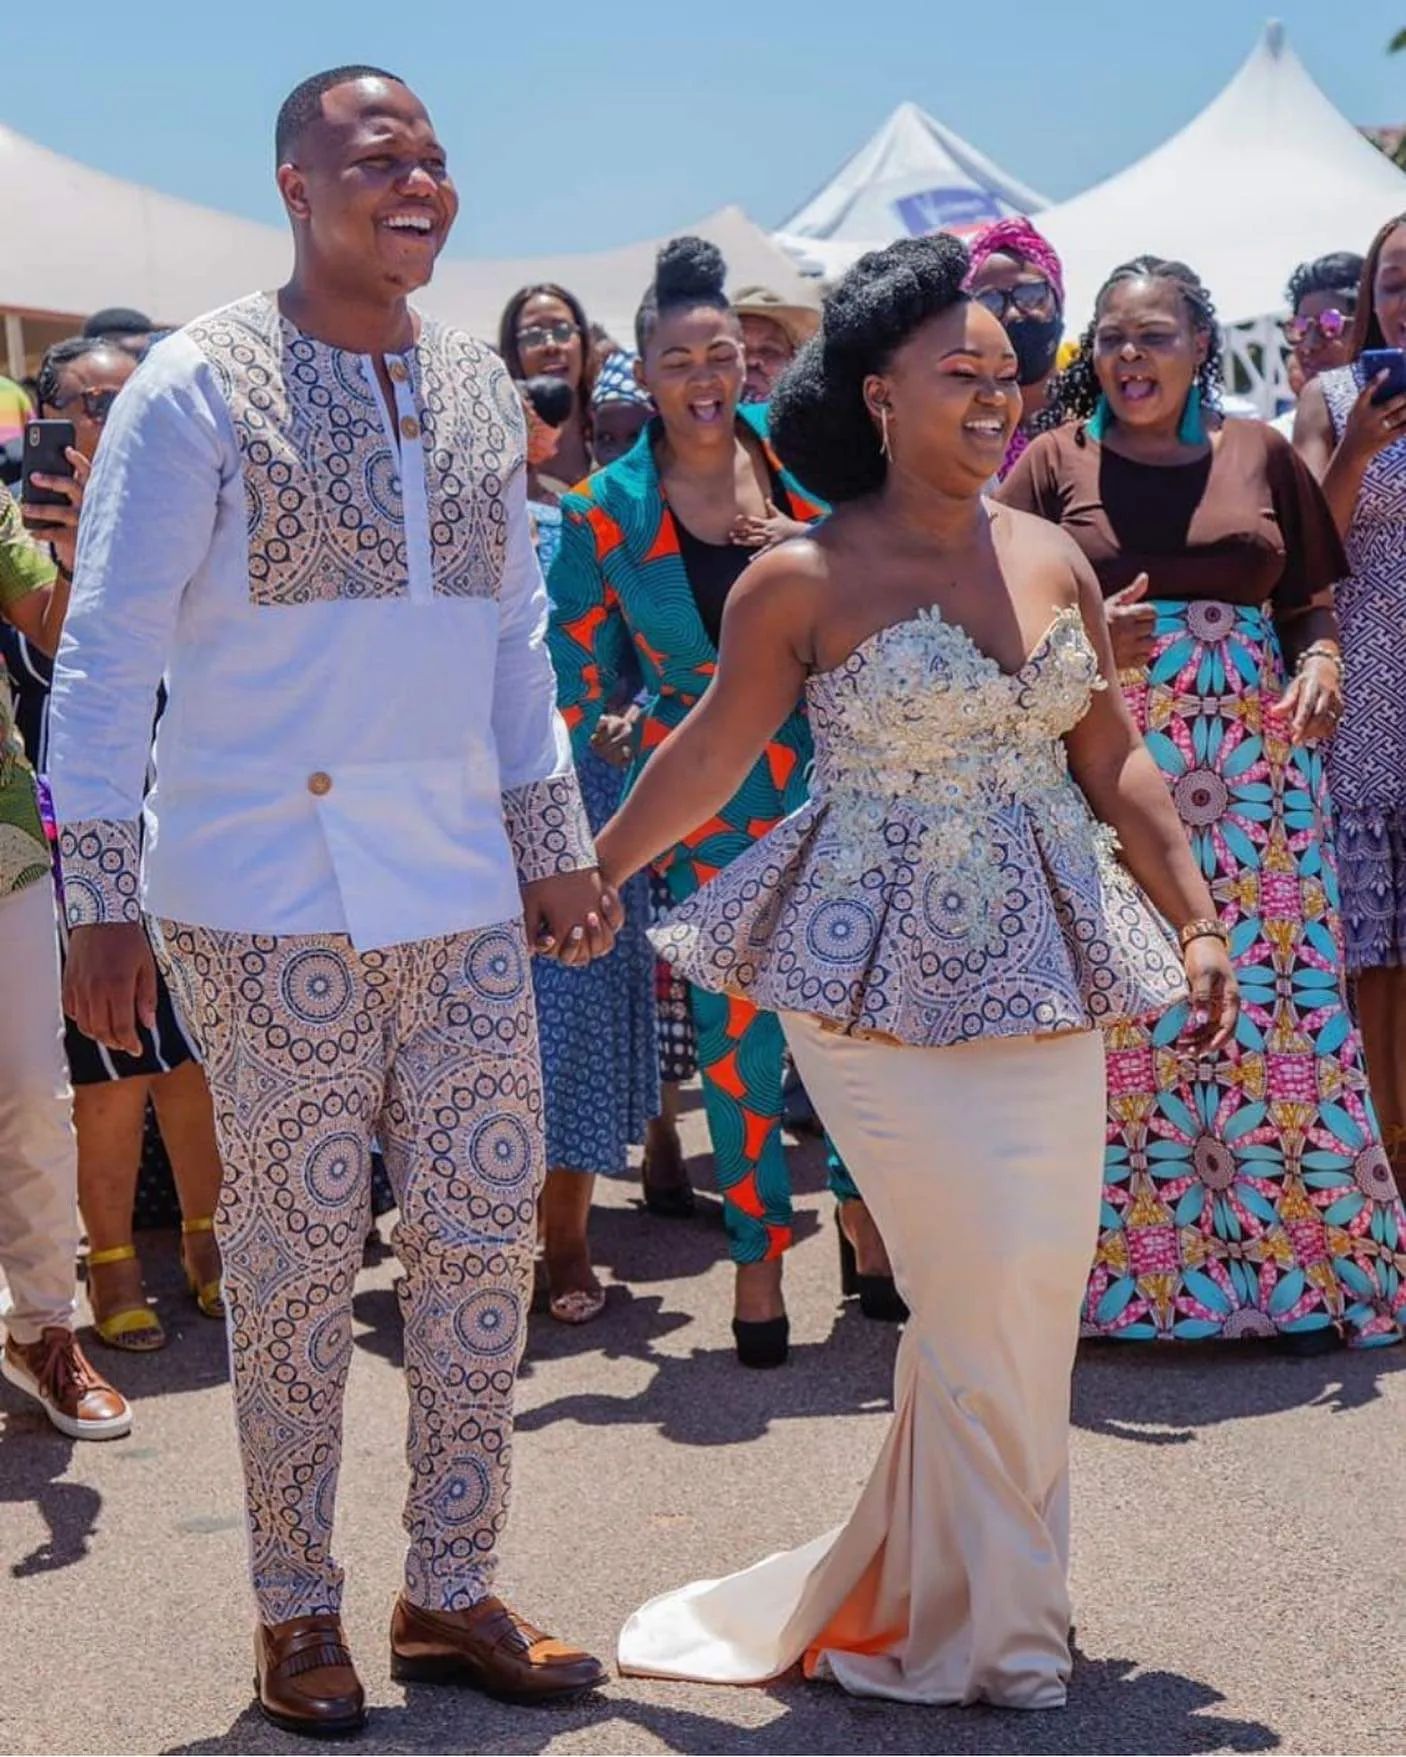 Tswana Traditional Wedding Attire: A Blend of Culture and Romance 21